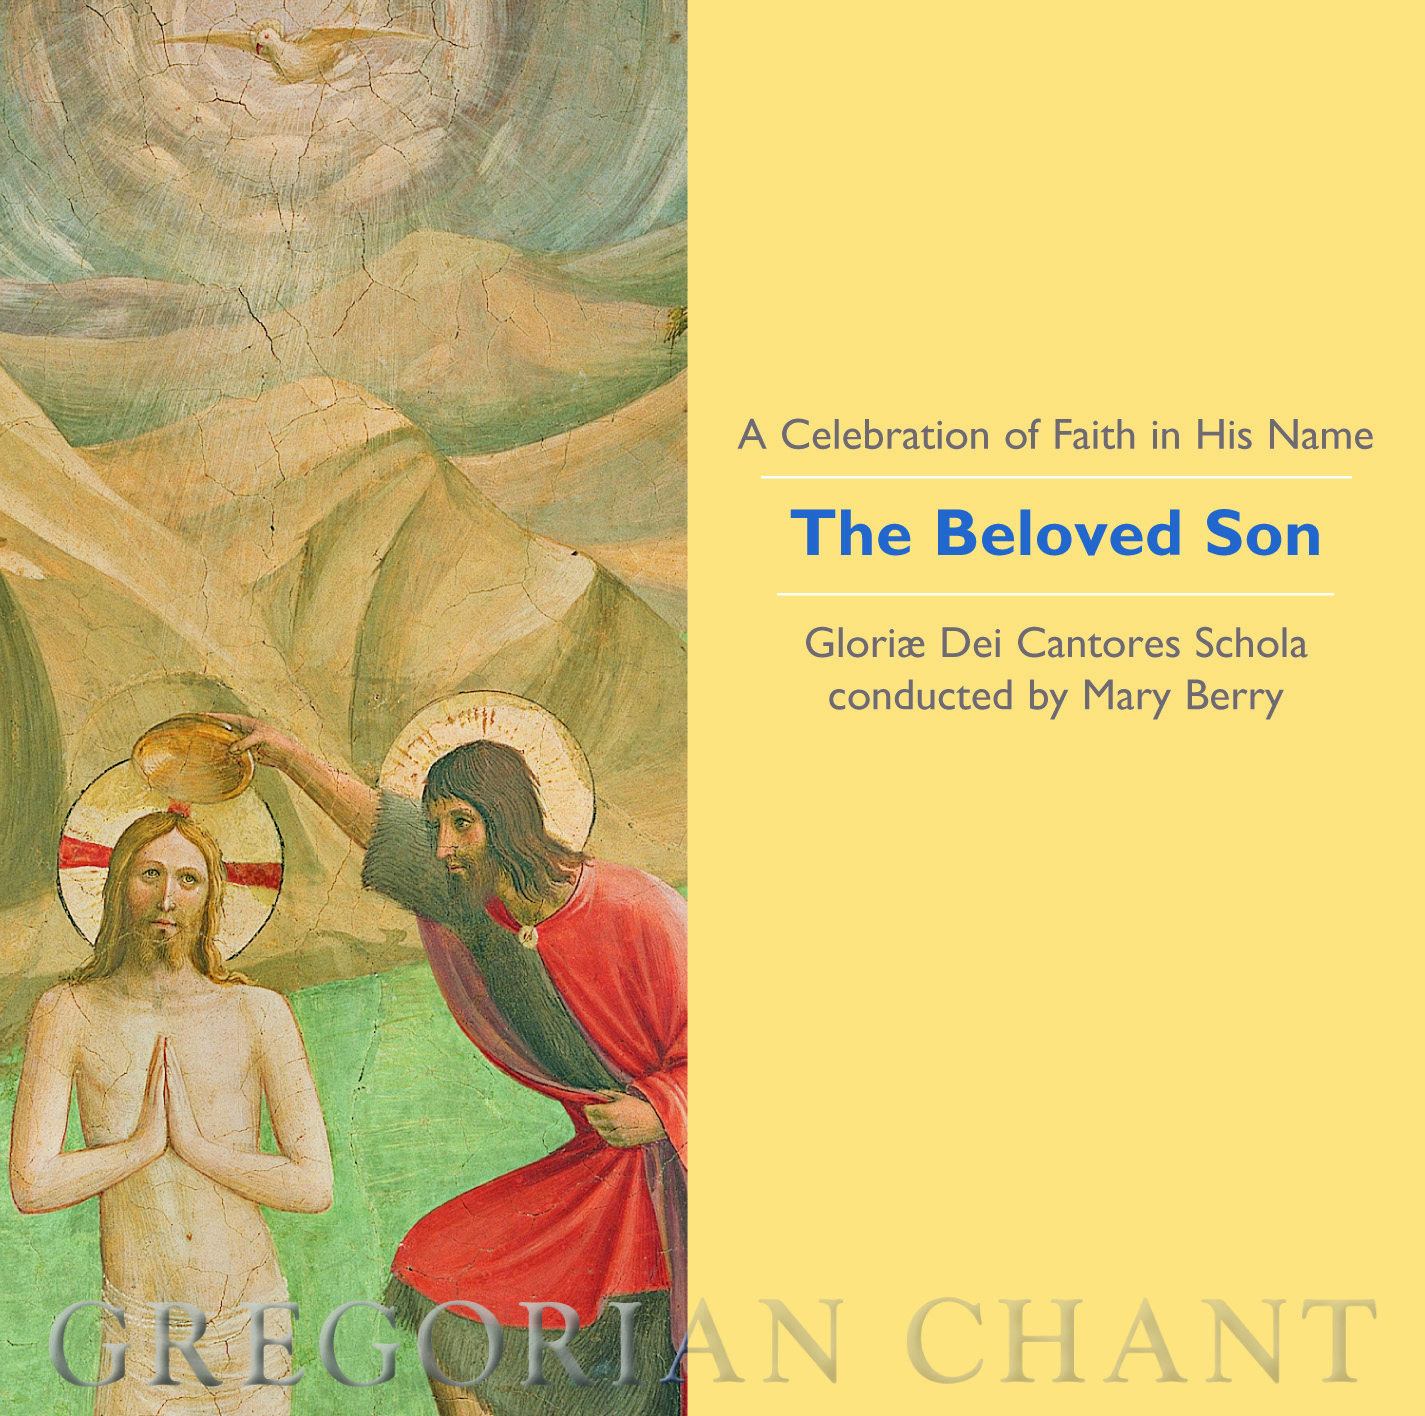 product image of 'The Beloved Son' Gloriae Dei Cantores Schola Gregorian Chant recording